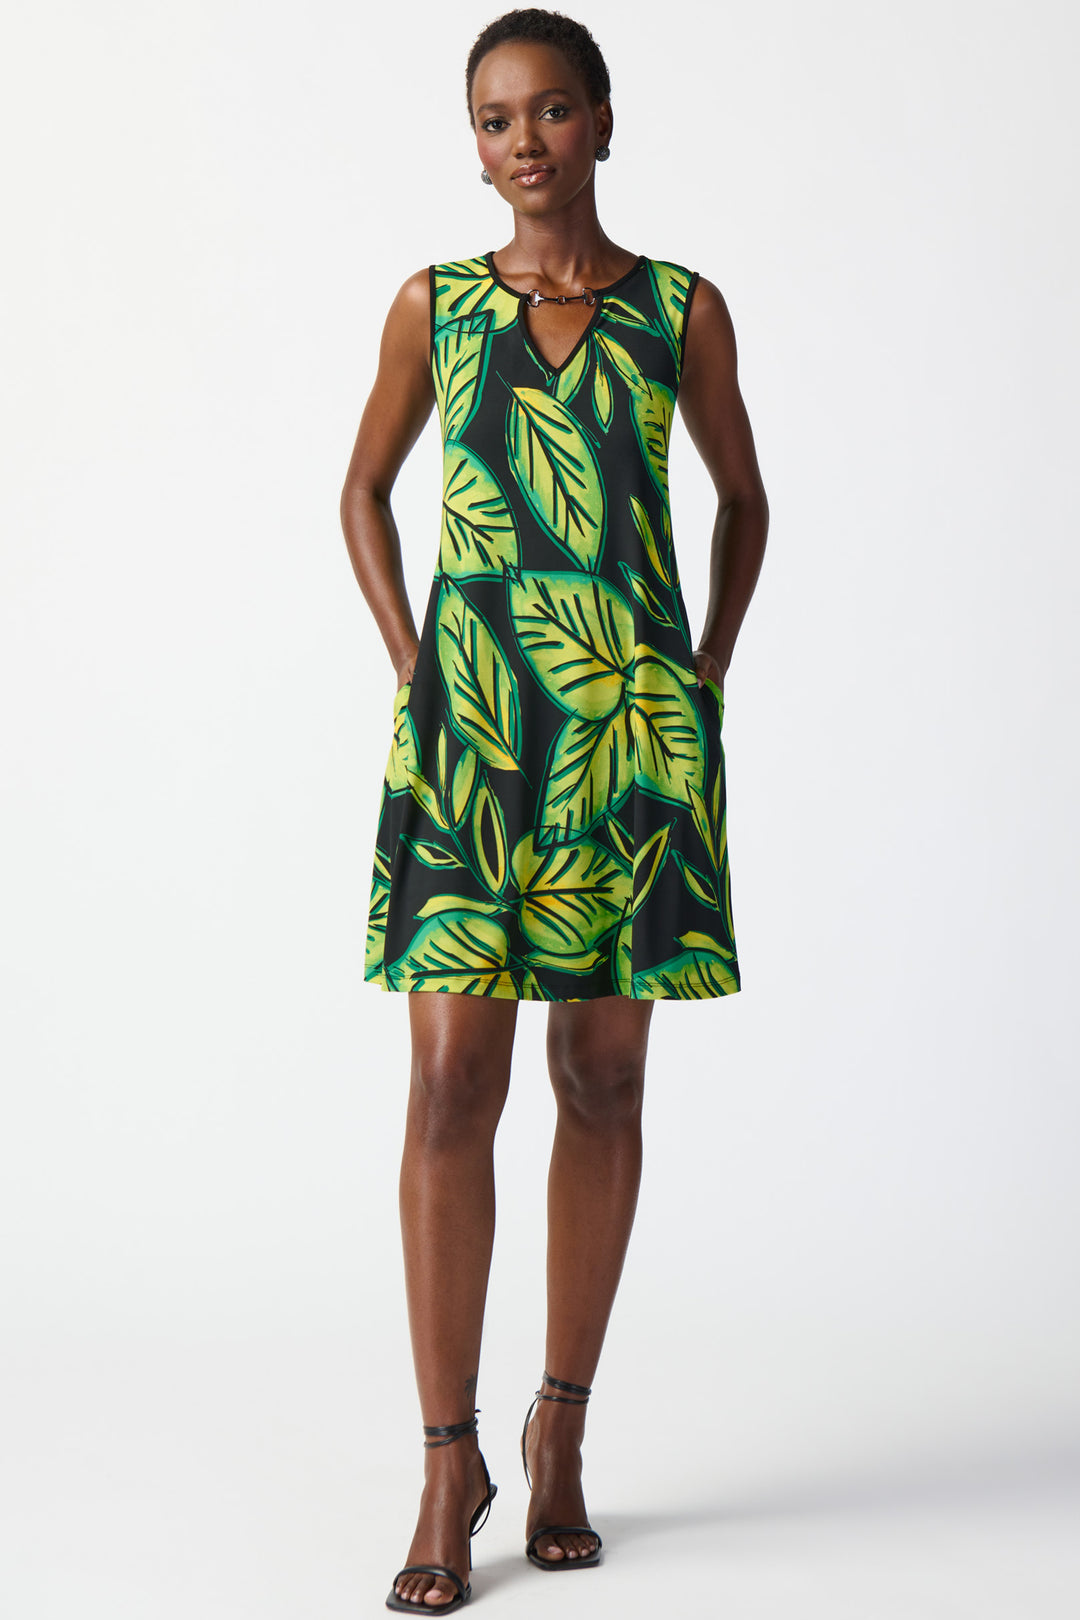 Featuring a tropical flare and a chic pointed neckline adorned with a metal chain, this dress will make you stand out!